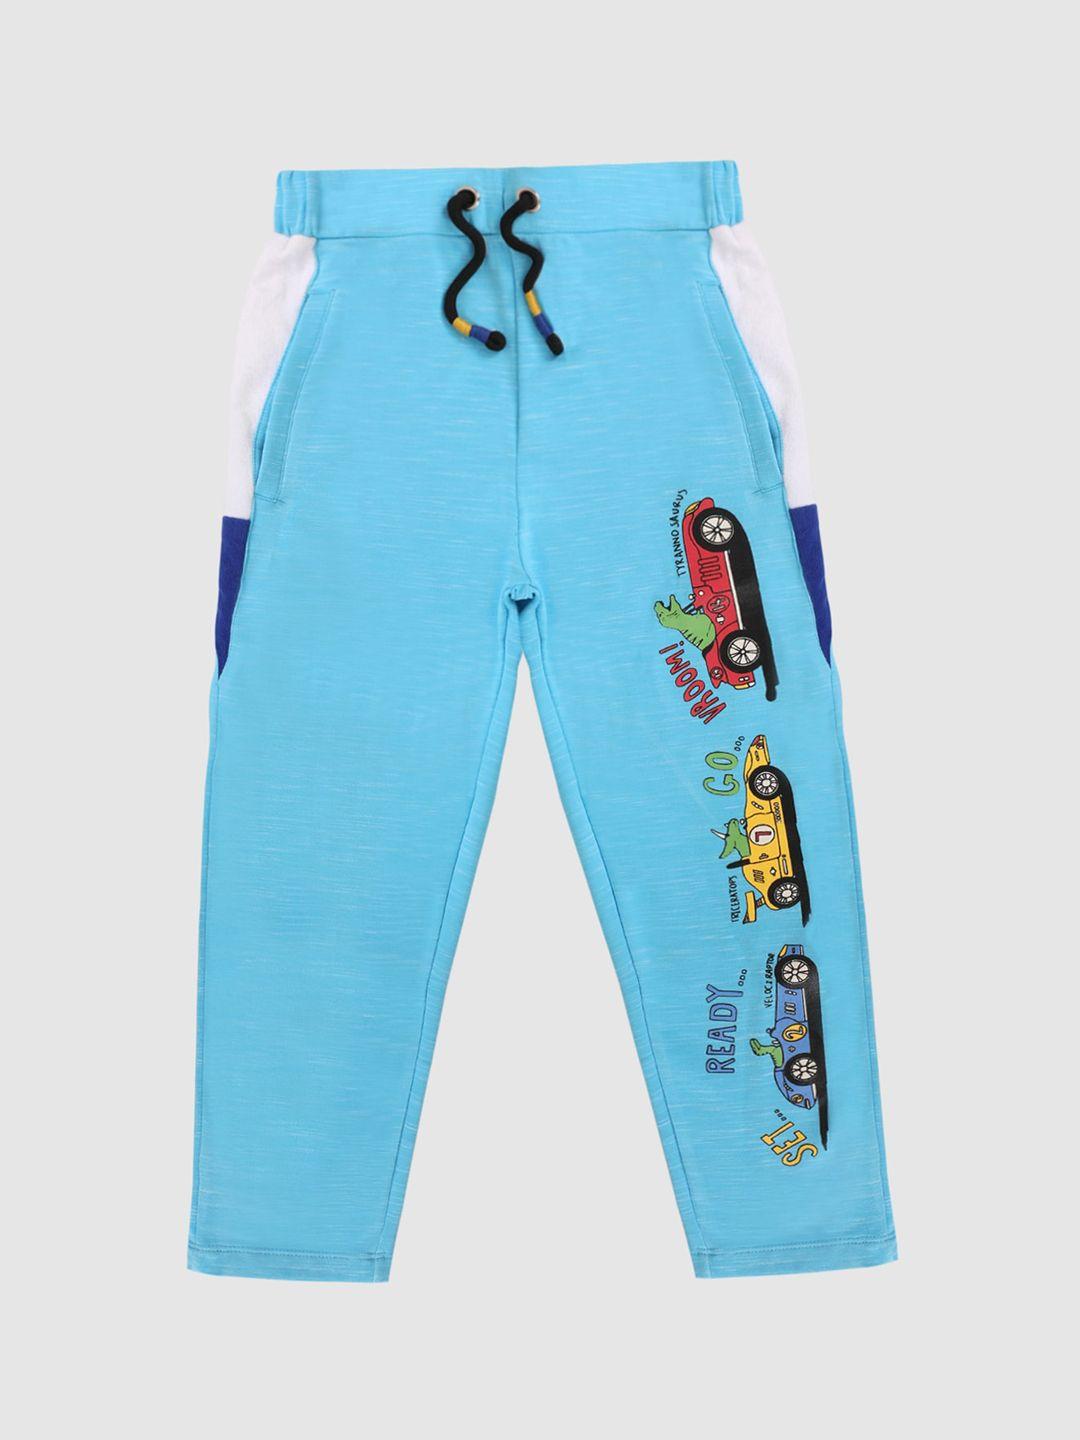 lazy shark boys blue & red printed cotton track pants